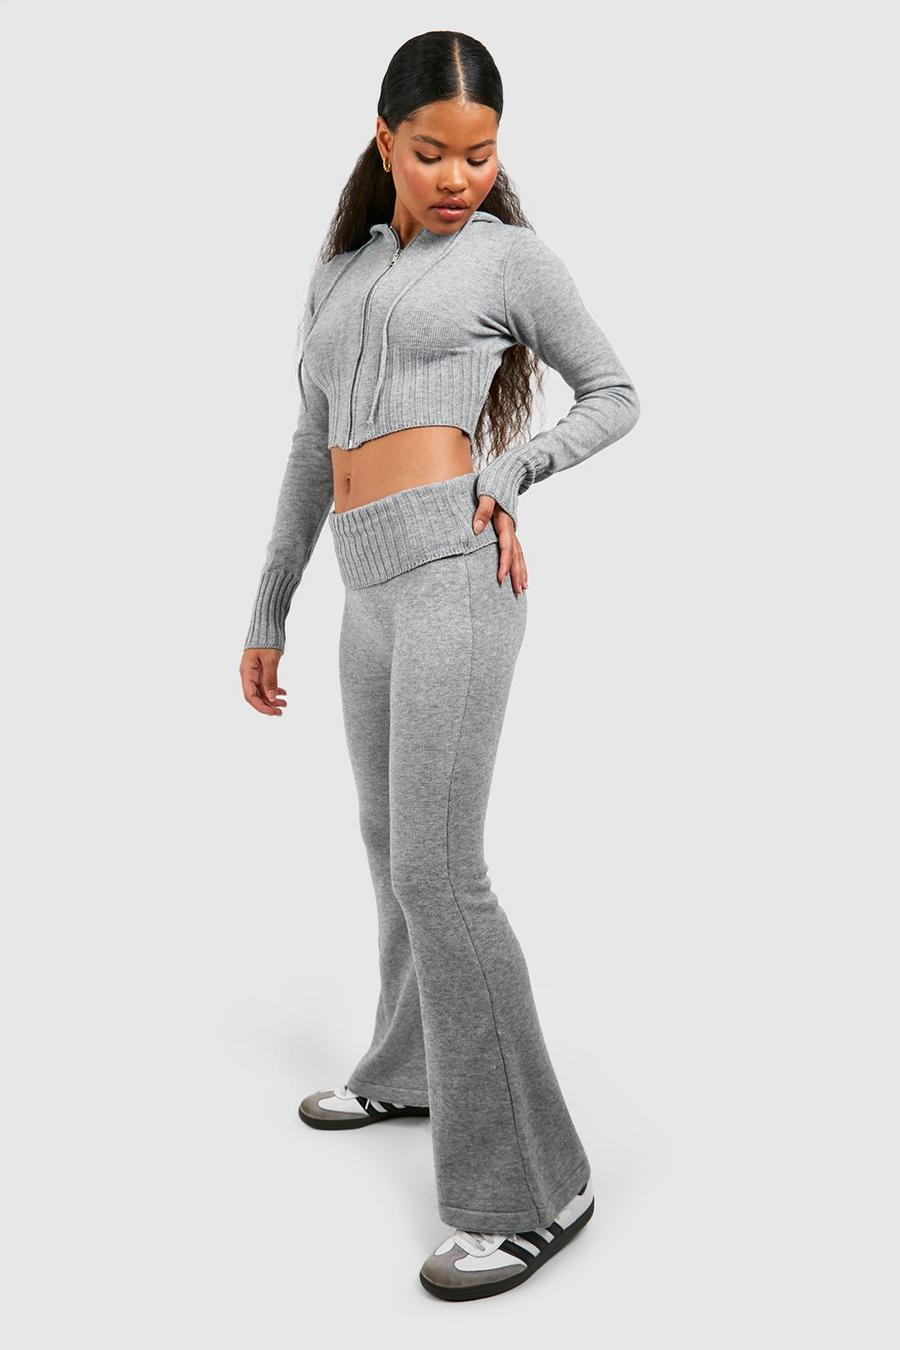 Petite Knitted Fold Over Waist Flares